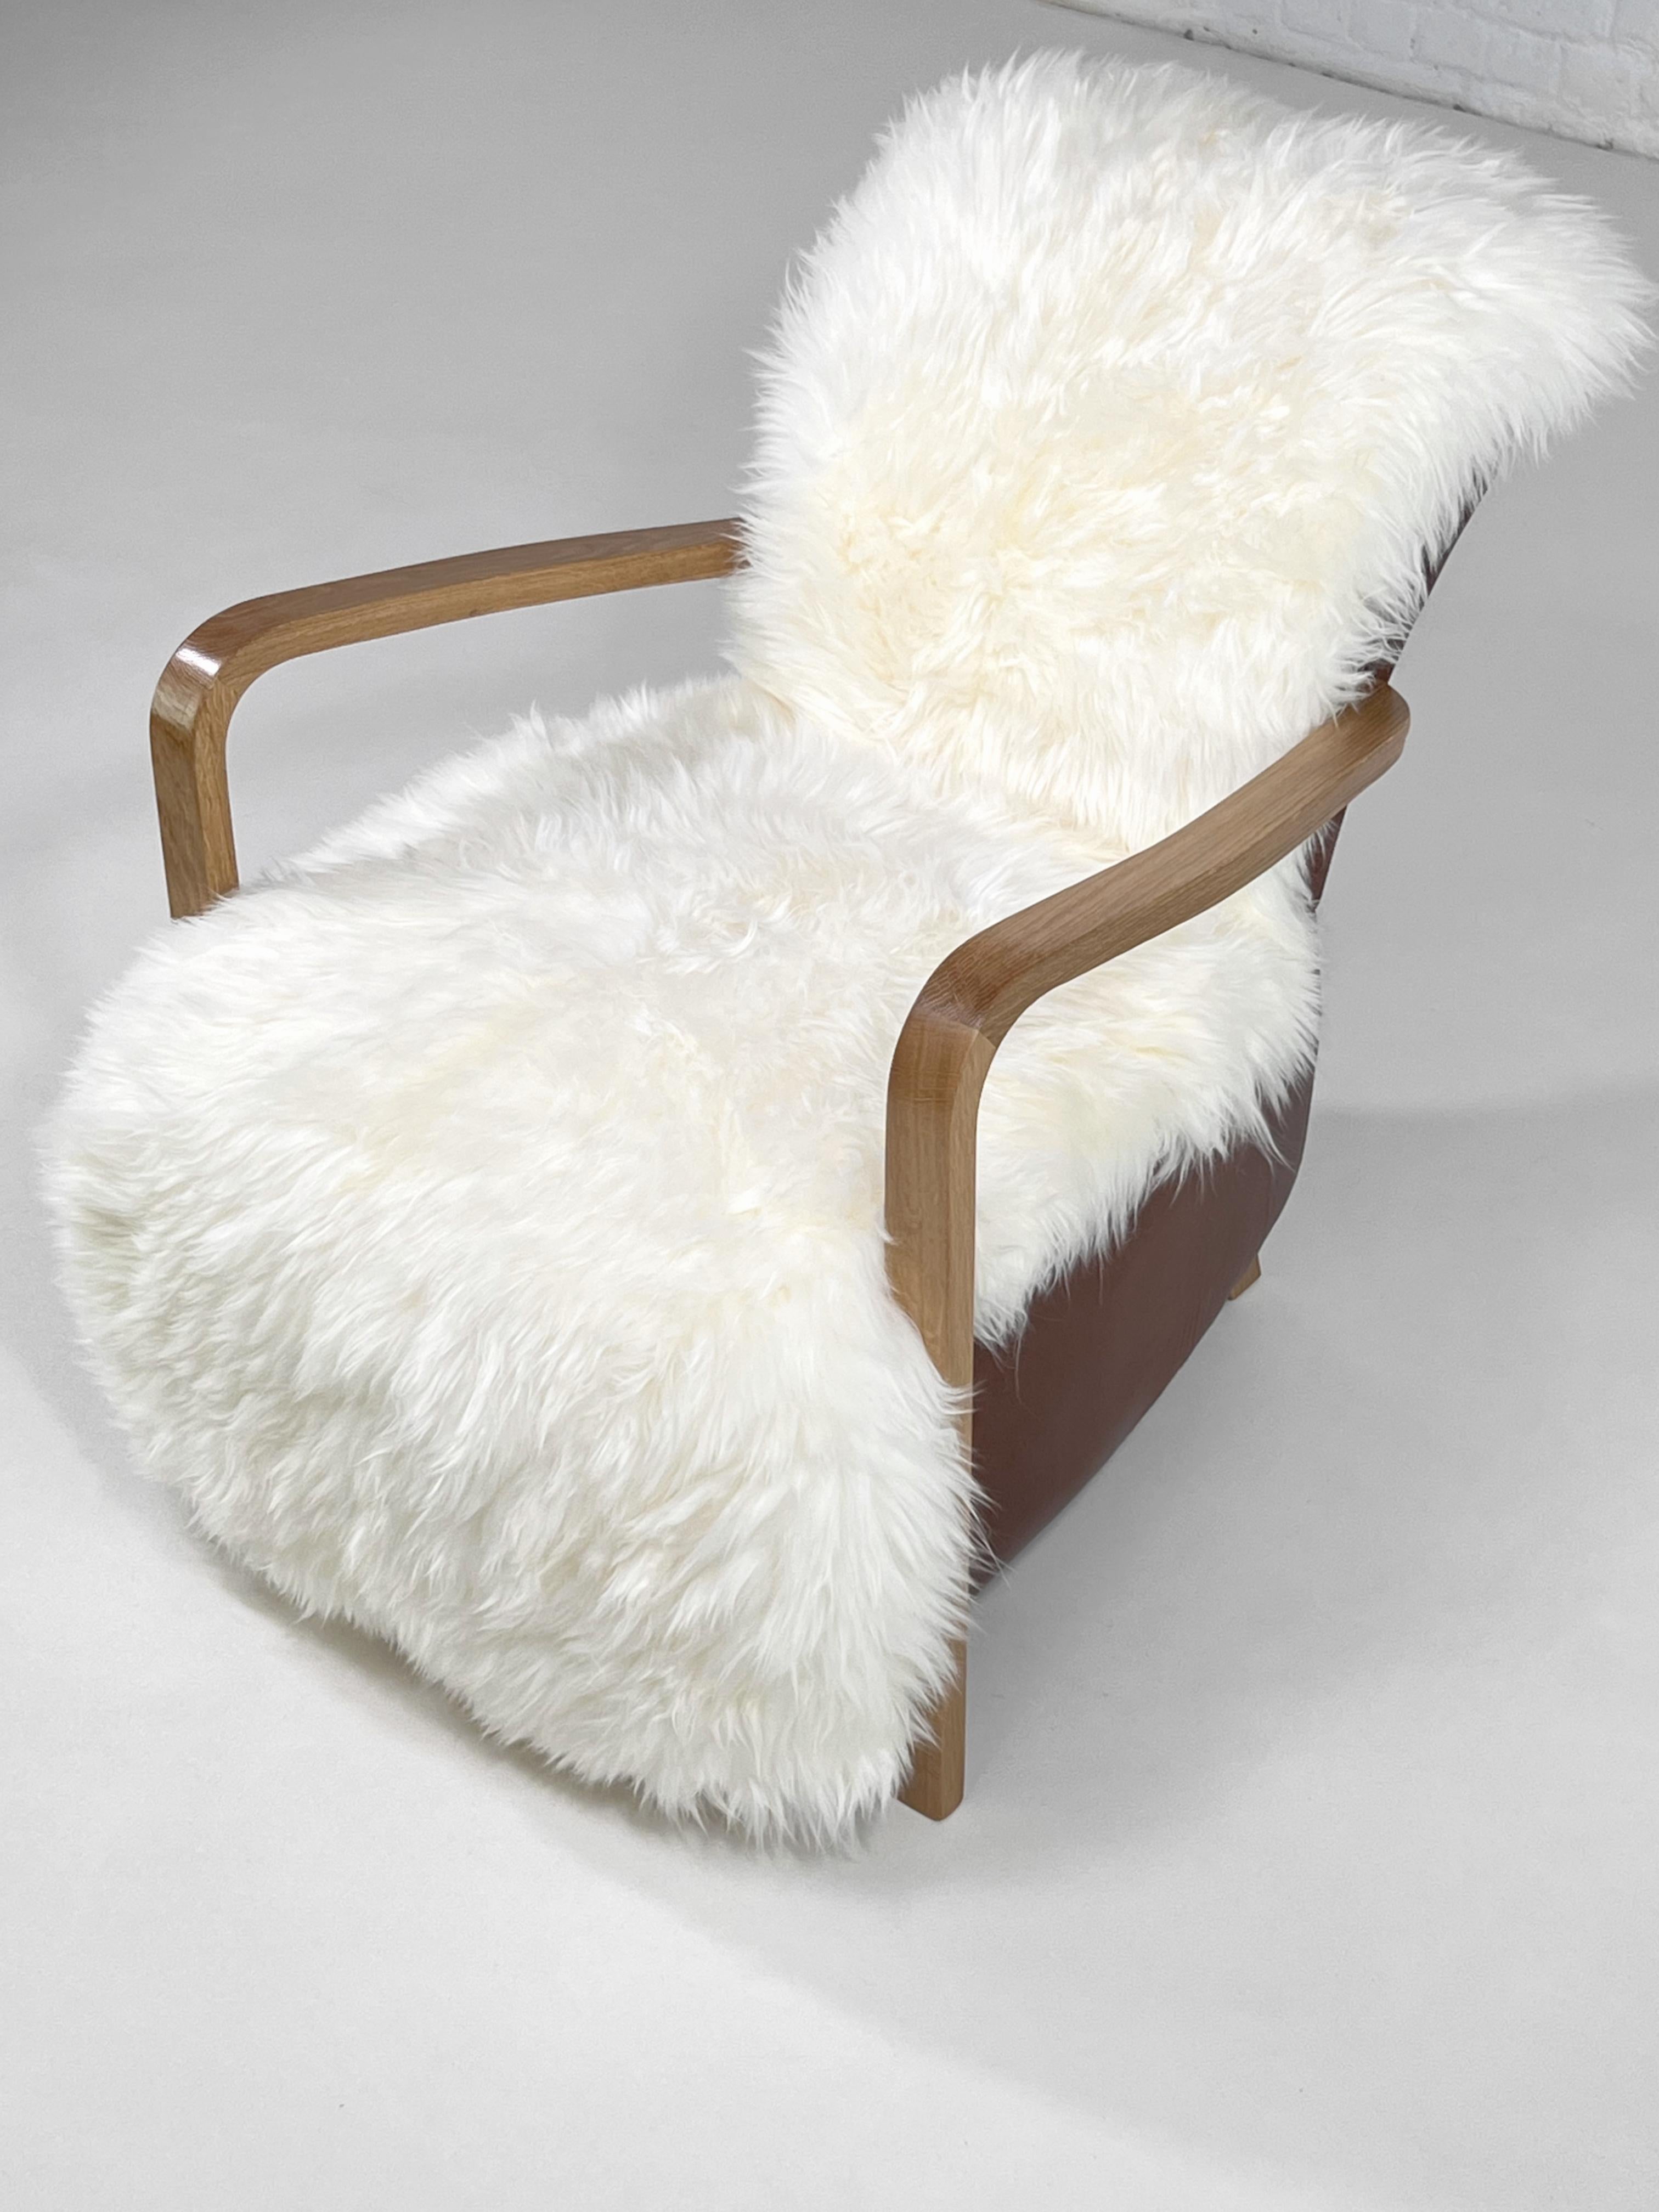 1950s - 1960s MCM Design Scandinavian Style Wooden And Cognac Leather Lounge Armchair With Sheepskin seat composed of a natural wooden feet which the front one make the armrests and a comfy seat in white sheepskin with cognac leather back.